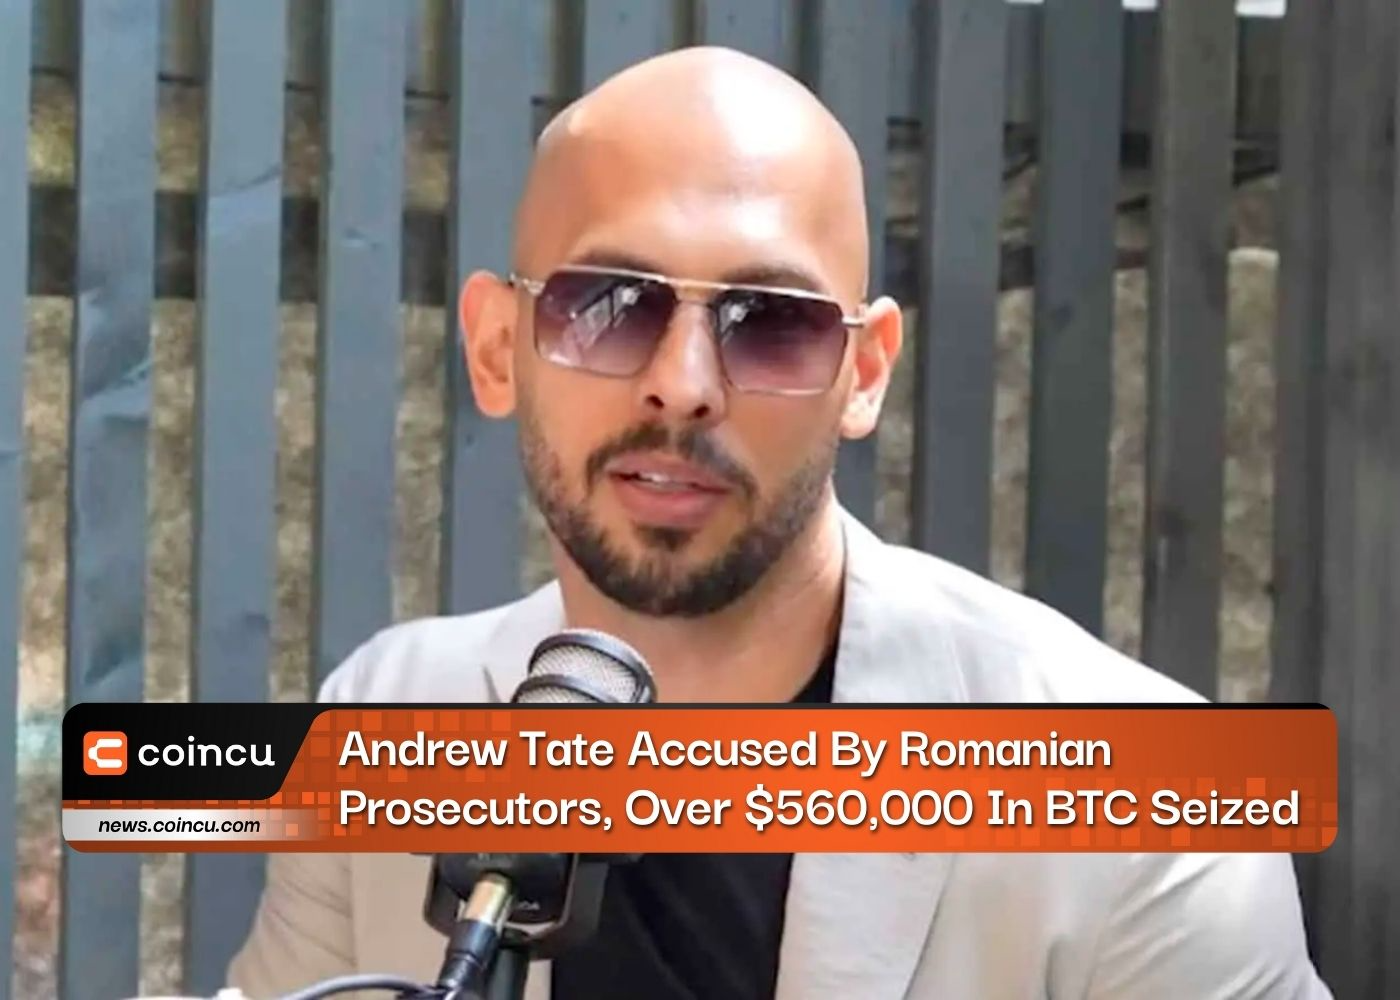 Andrew Tate Accused By Romanian Prosecutors, Over $560,000 In BTC Seized